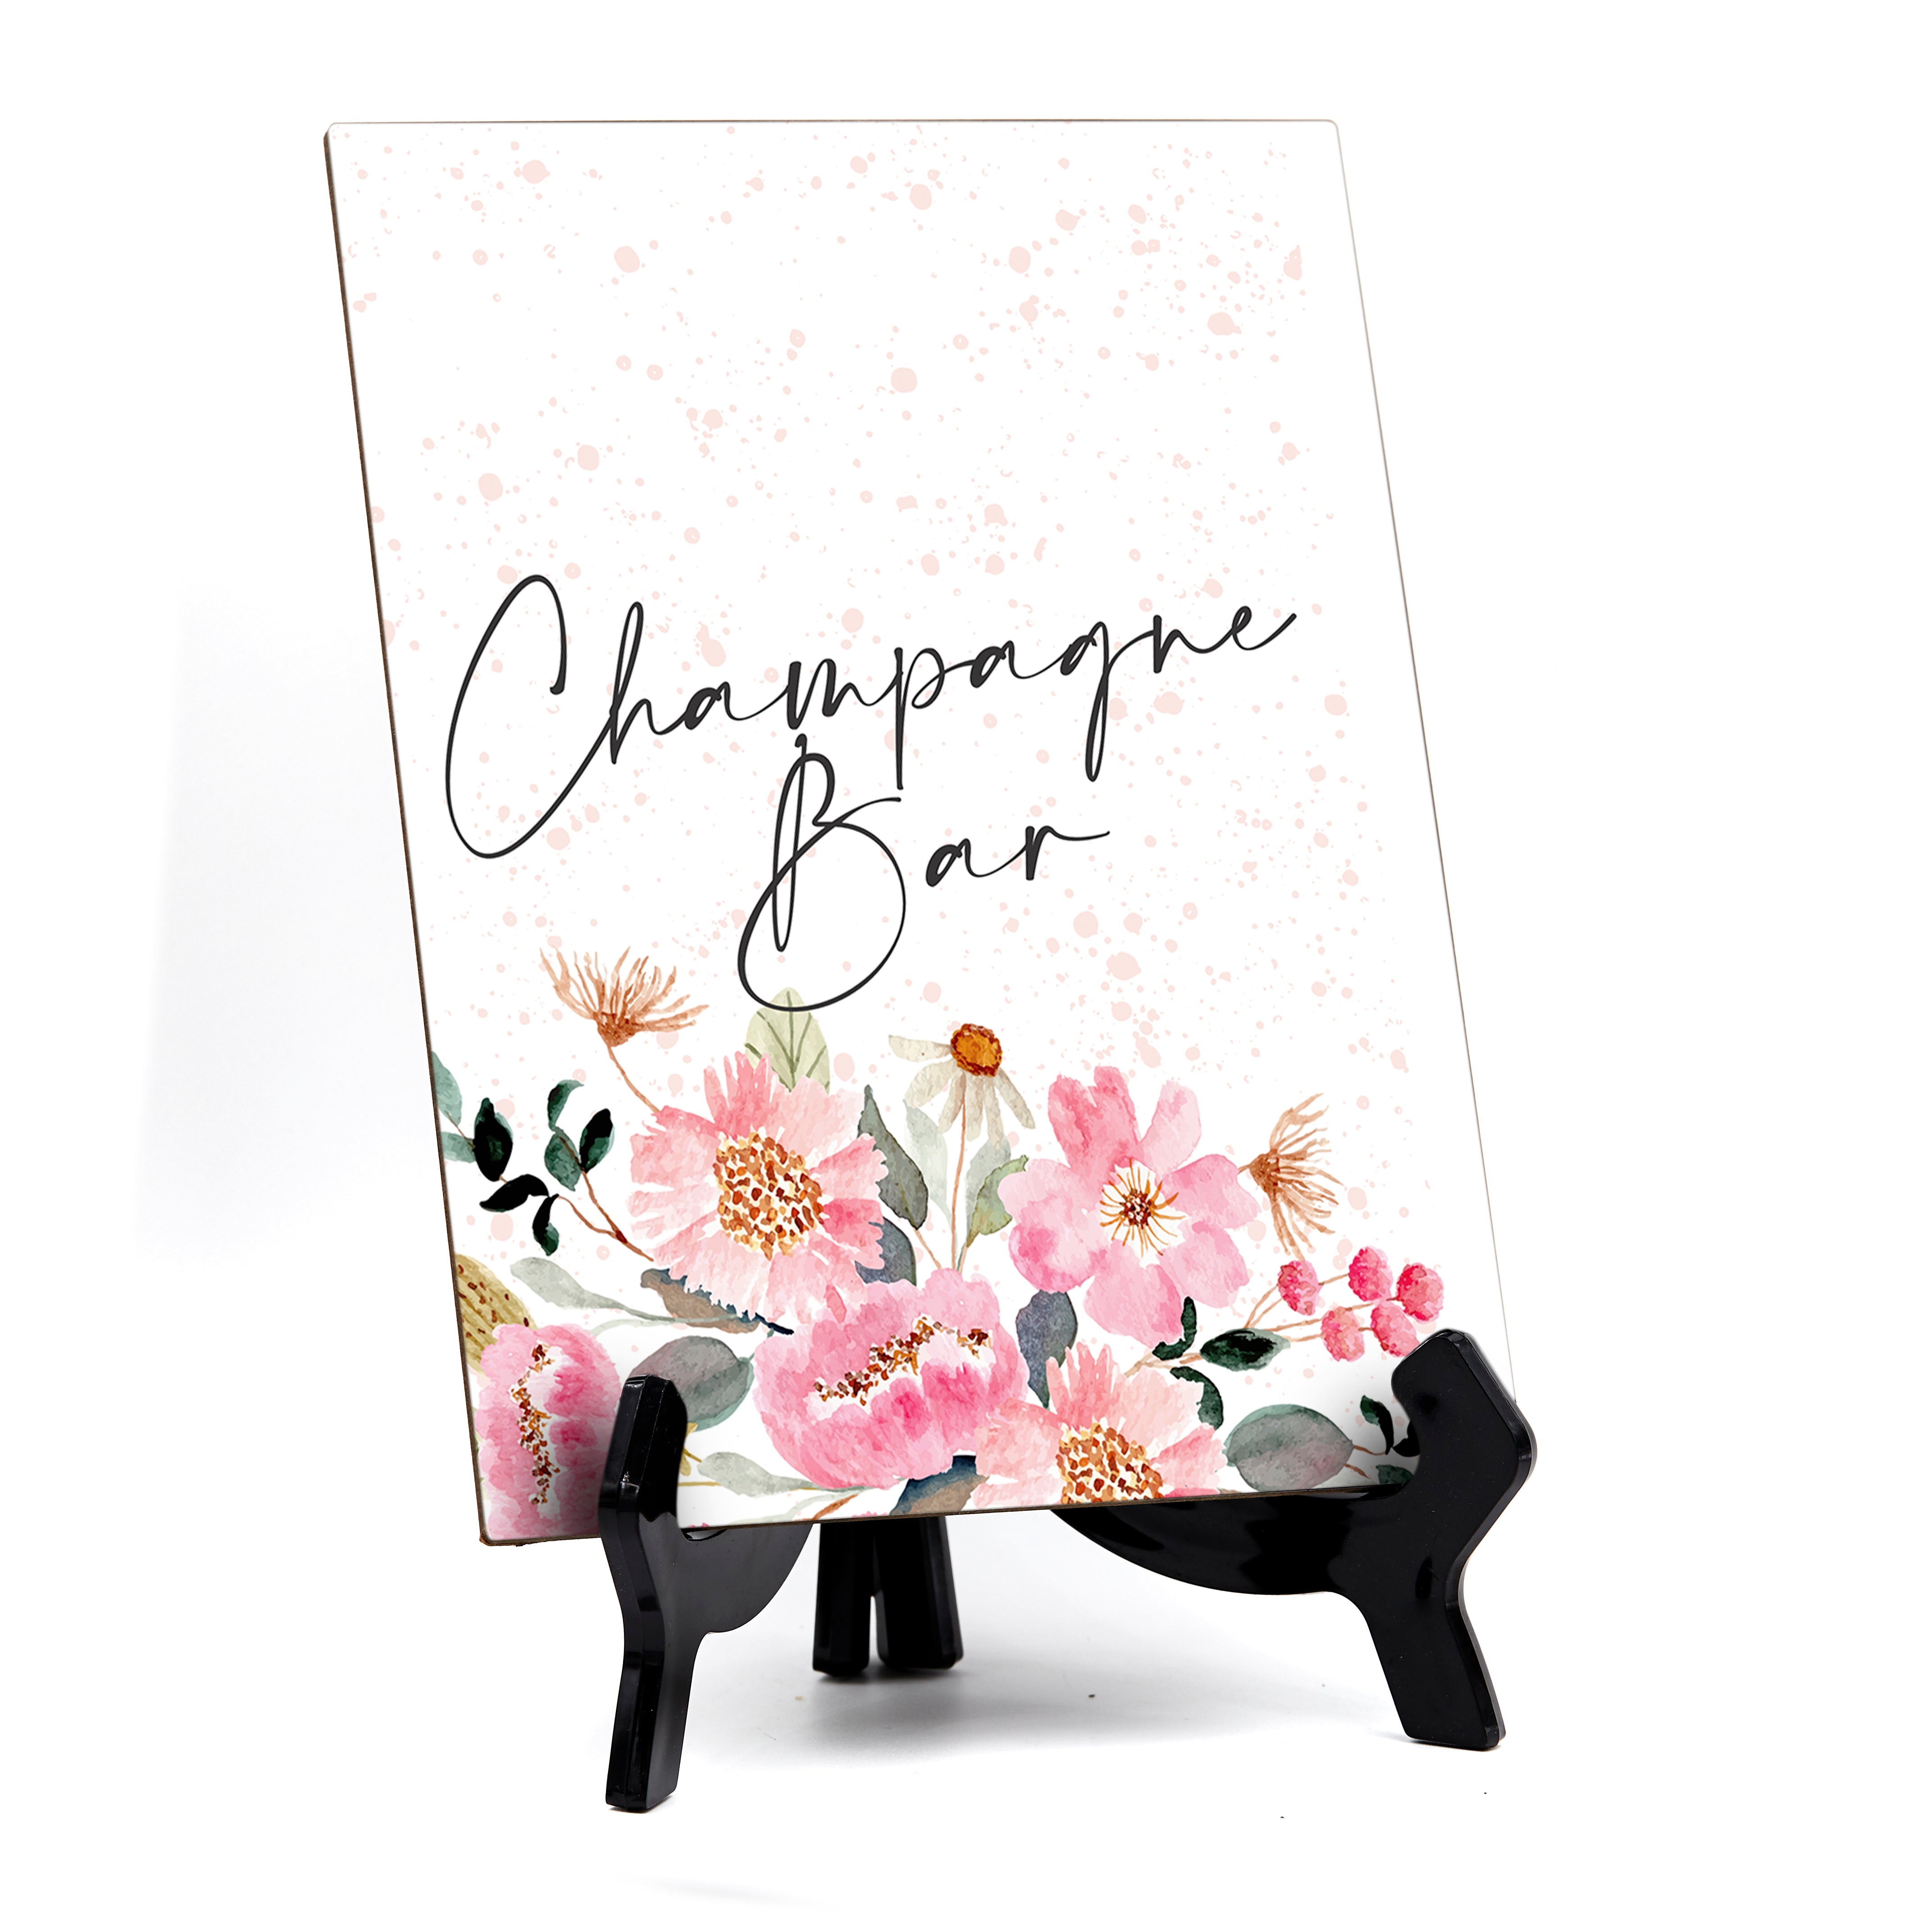 Champagne Bar Table Sign with Easel, Floral Watercolor Design (6" x 8")